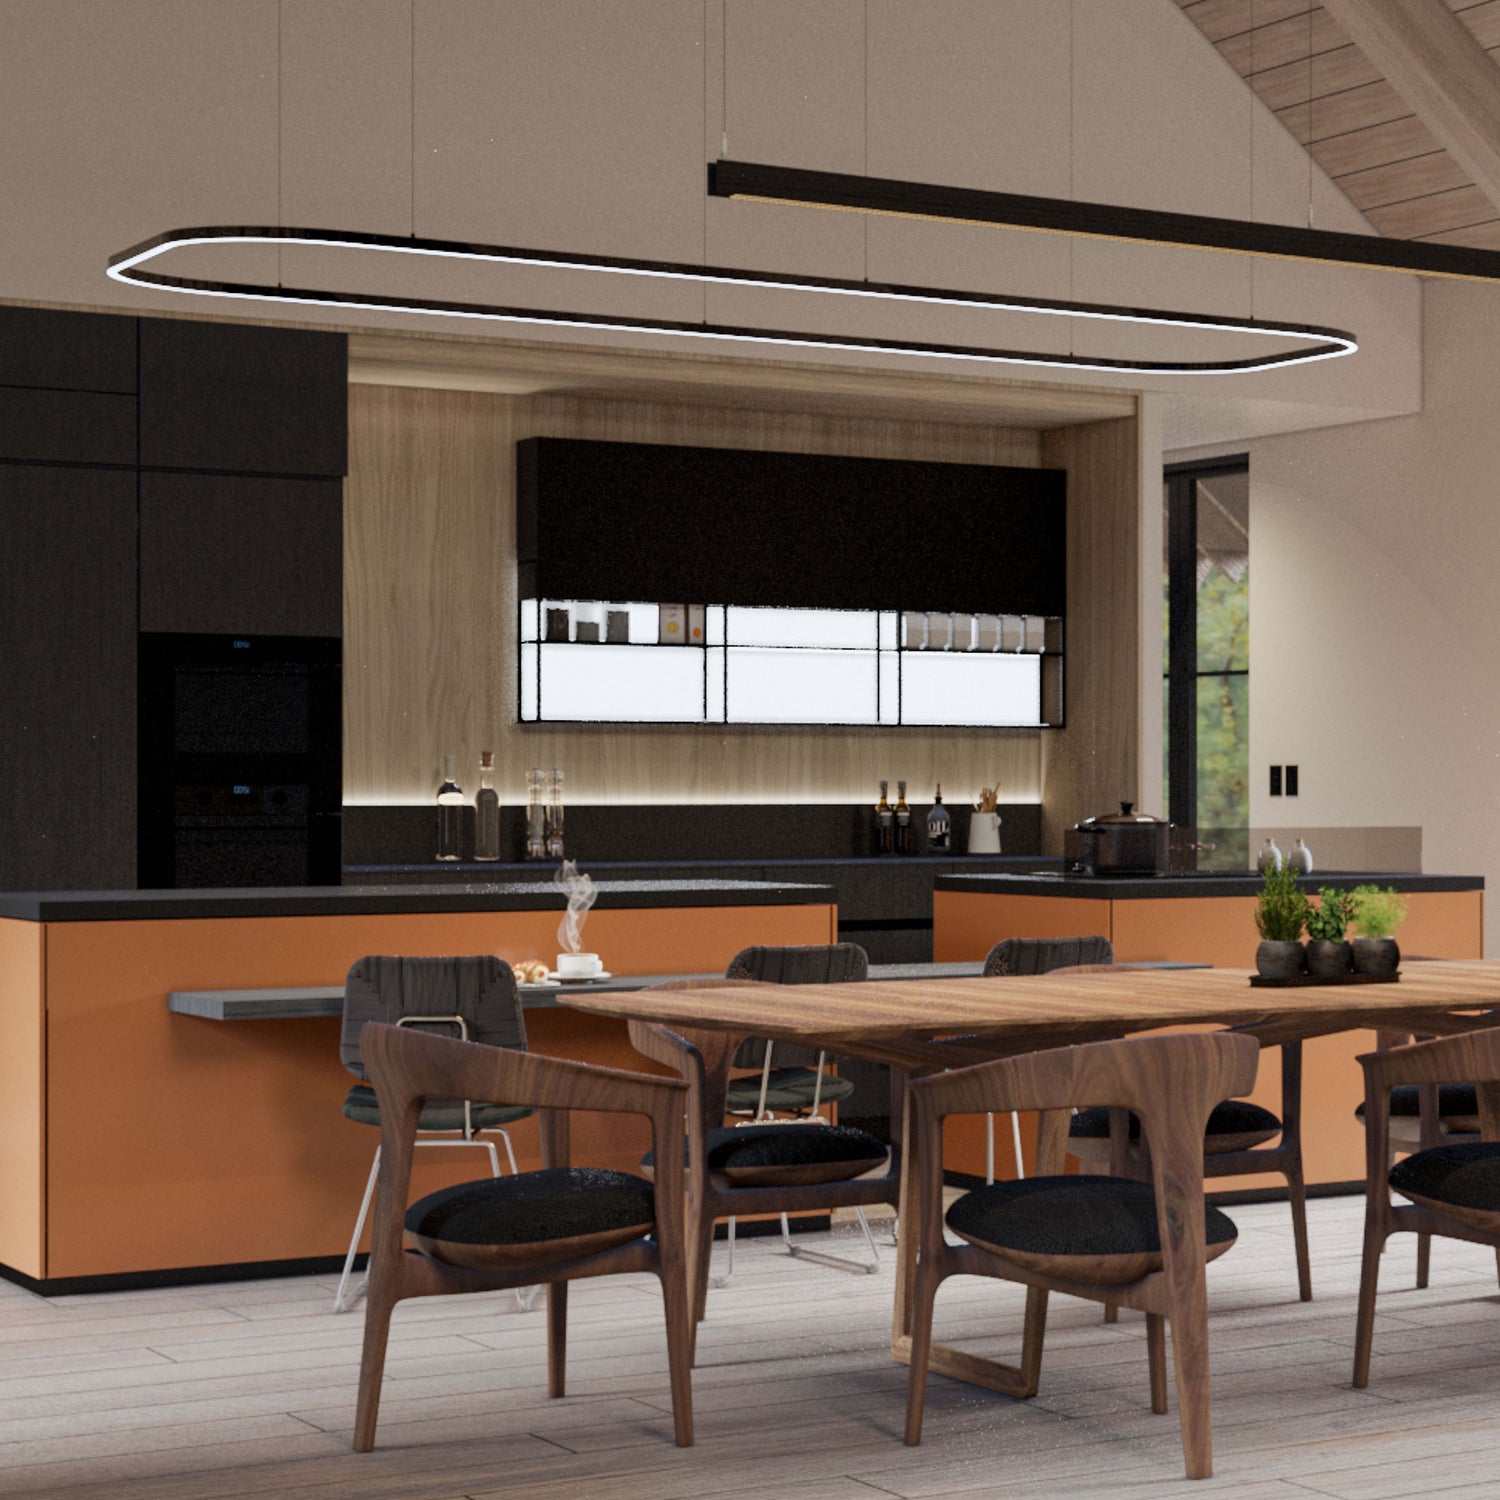 kitchen design with vaulted ceiling, pendant lamp, diining table and chairs